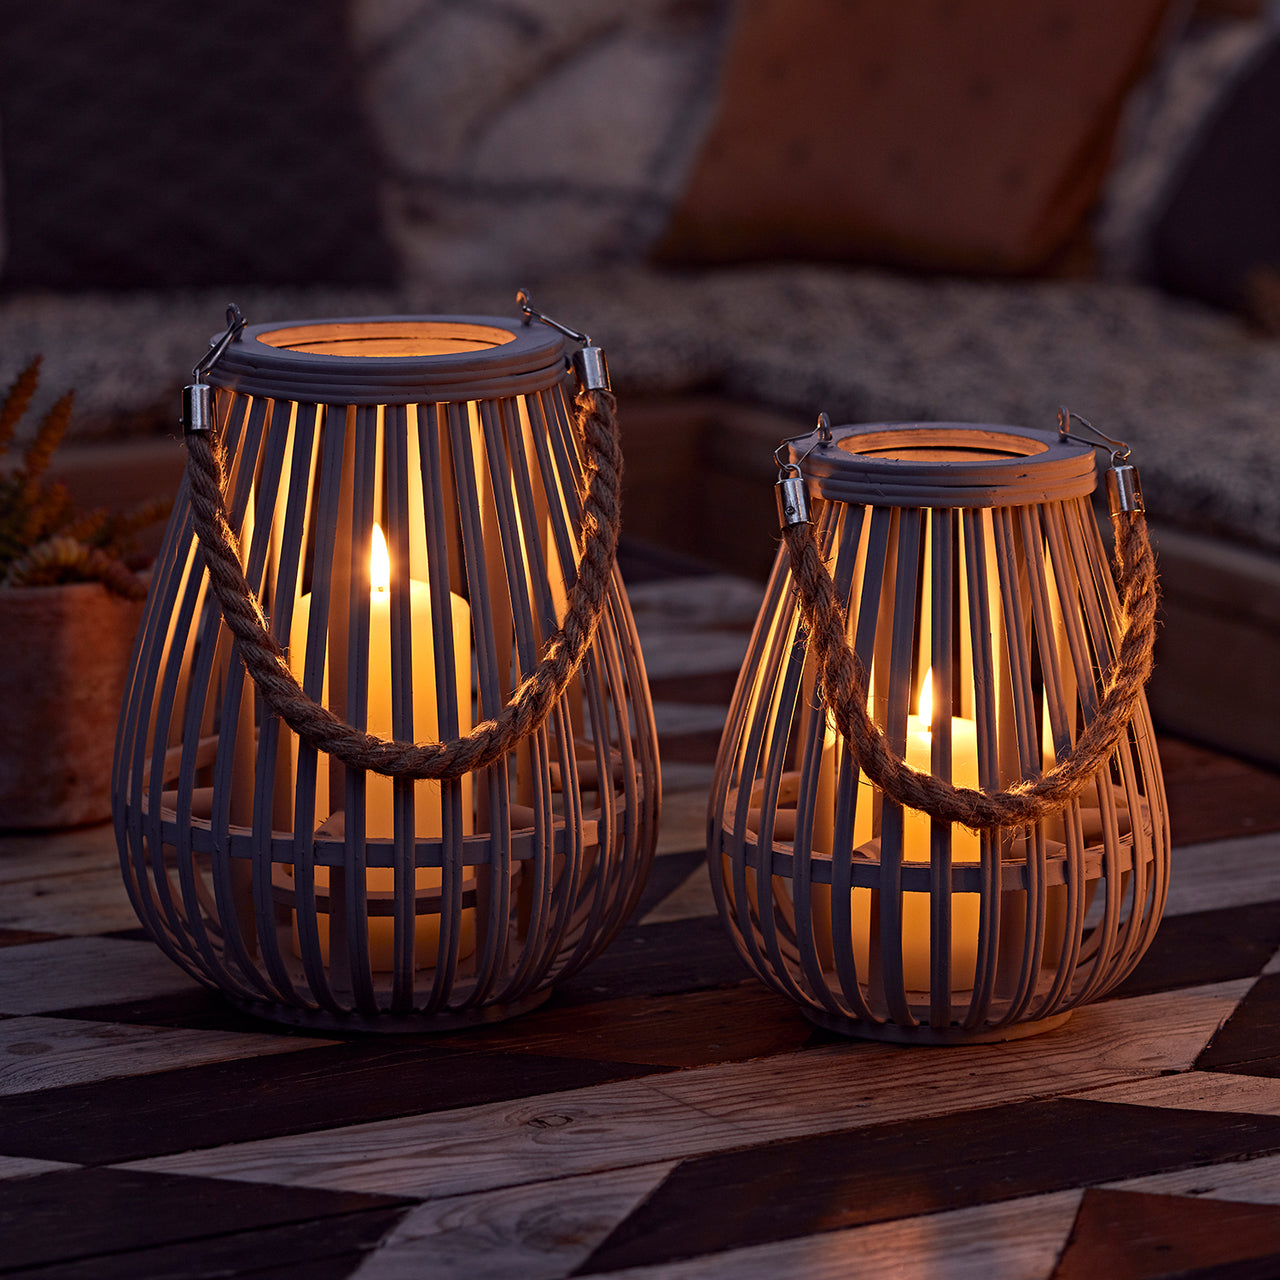 Fraser Grey Bamboo Lantern with TruGlow® Candle